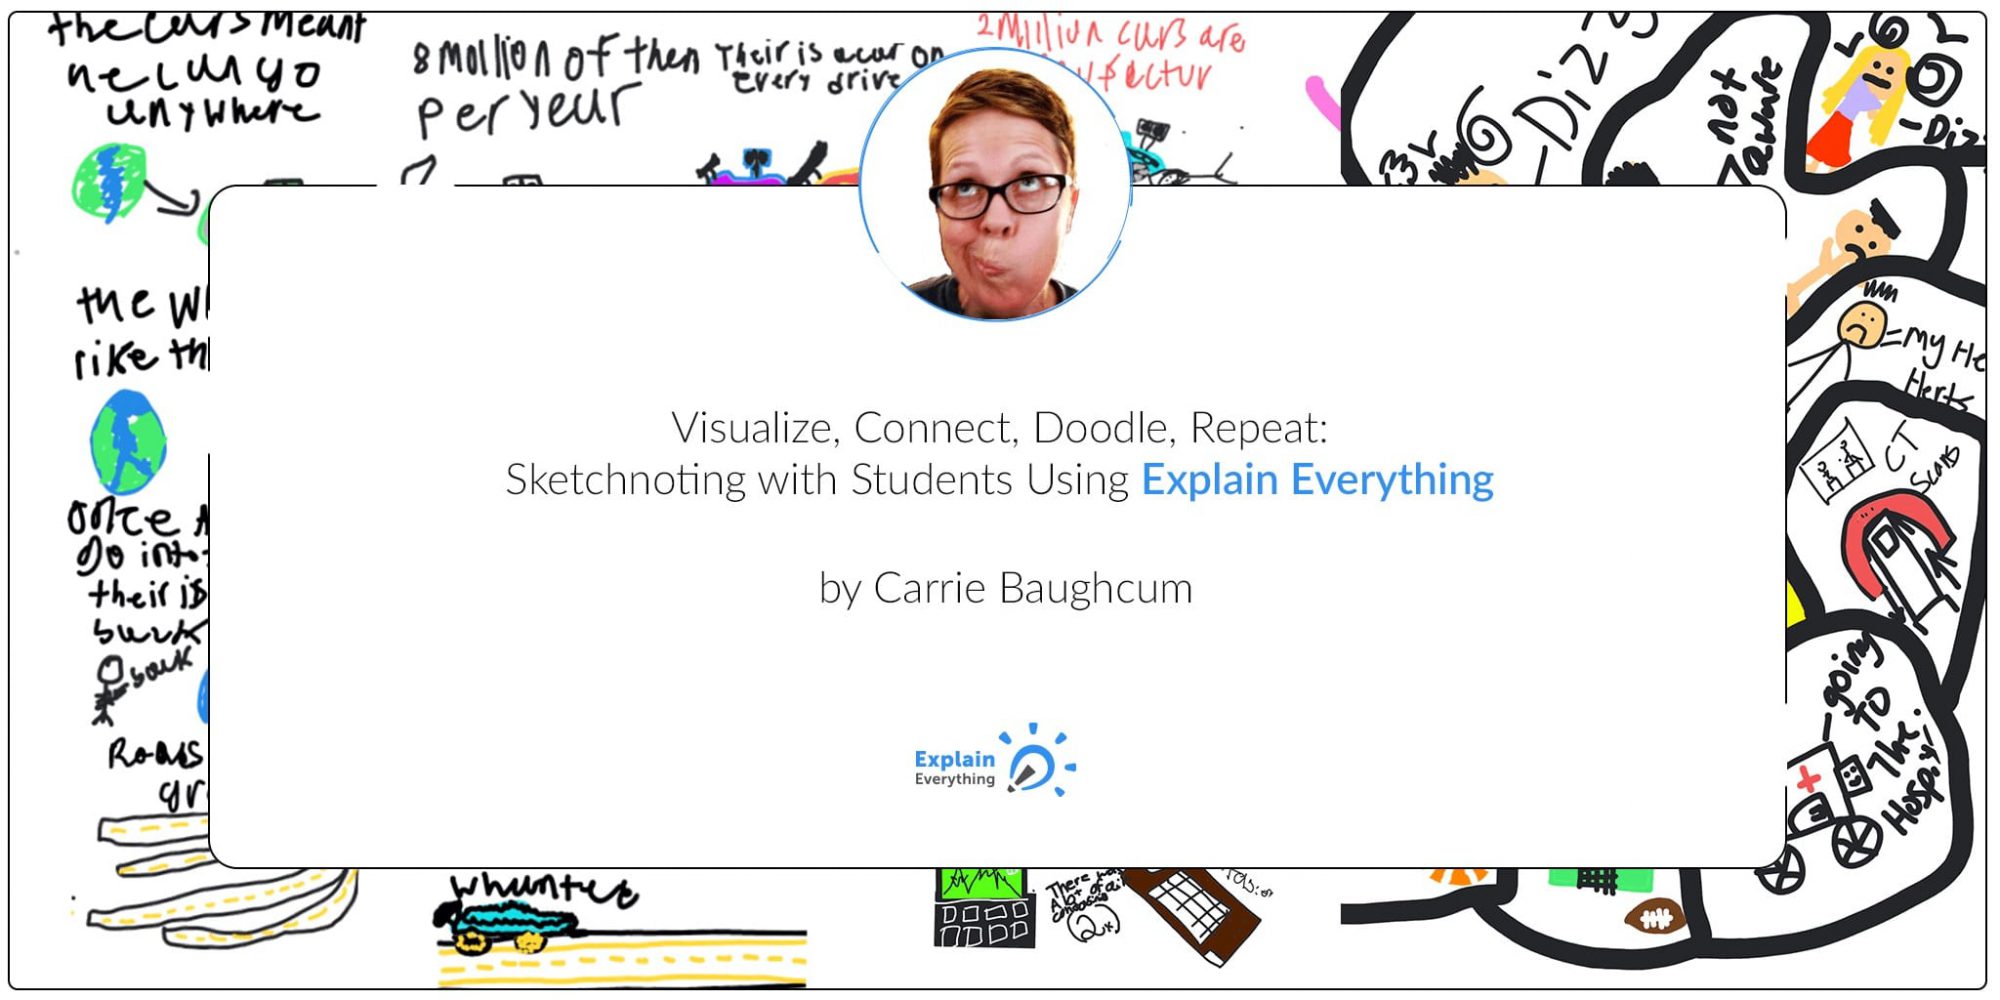 Visualize, connect, doodle, and repeat with explain everything